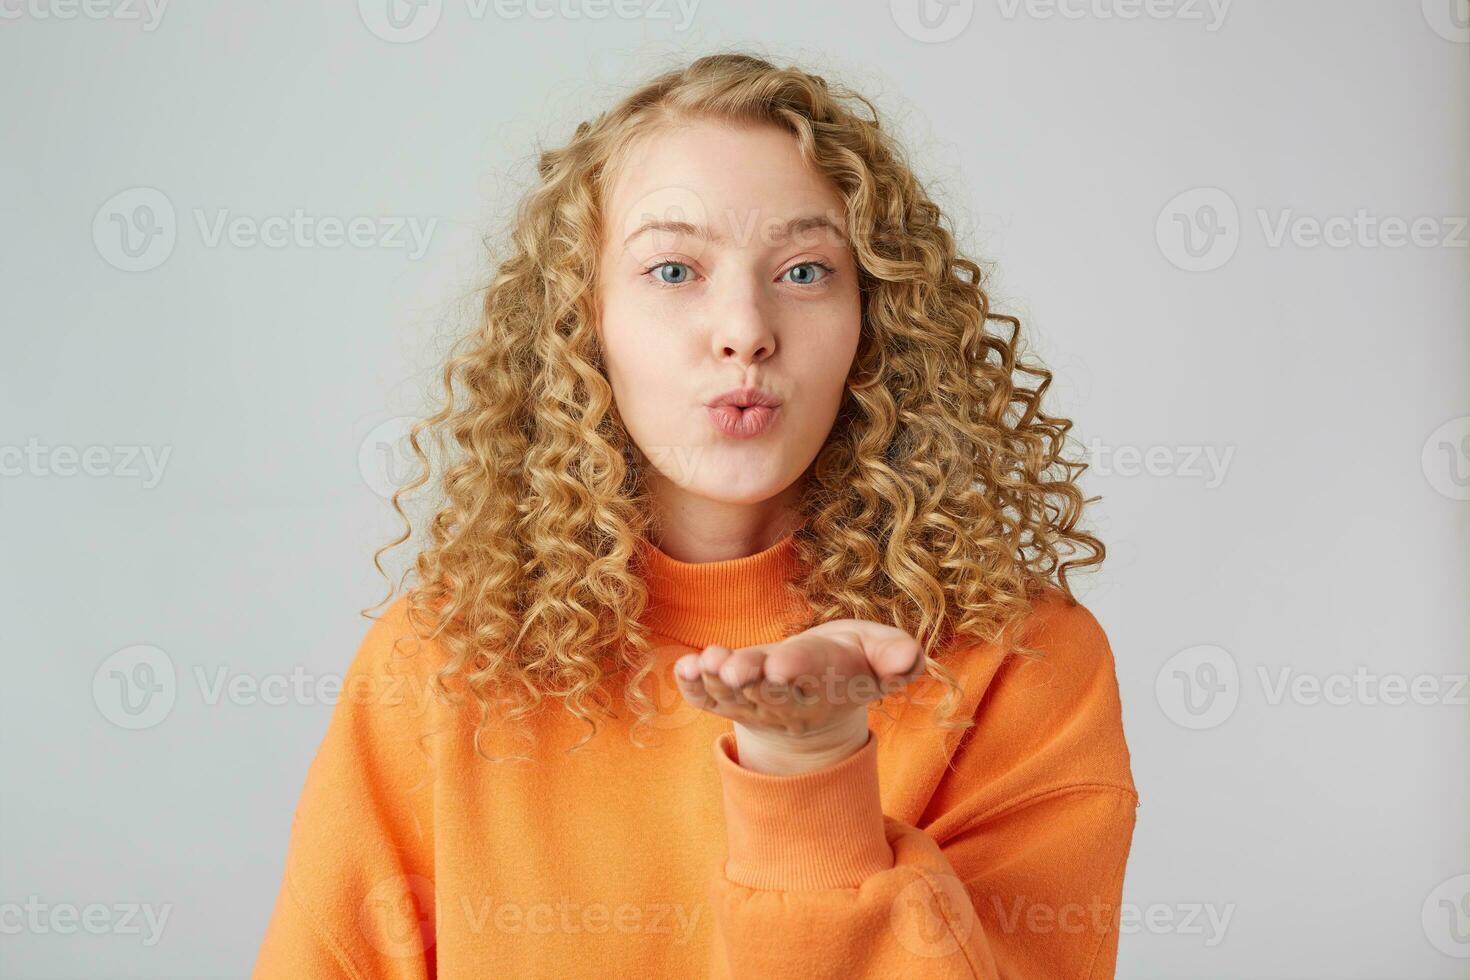 Blowing sending air kiss lovely pretty curly girl with pout lips isolated on white background, shows tender feelings.Sweet kiss directly to the camera. photo